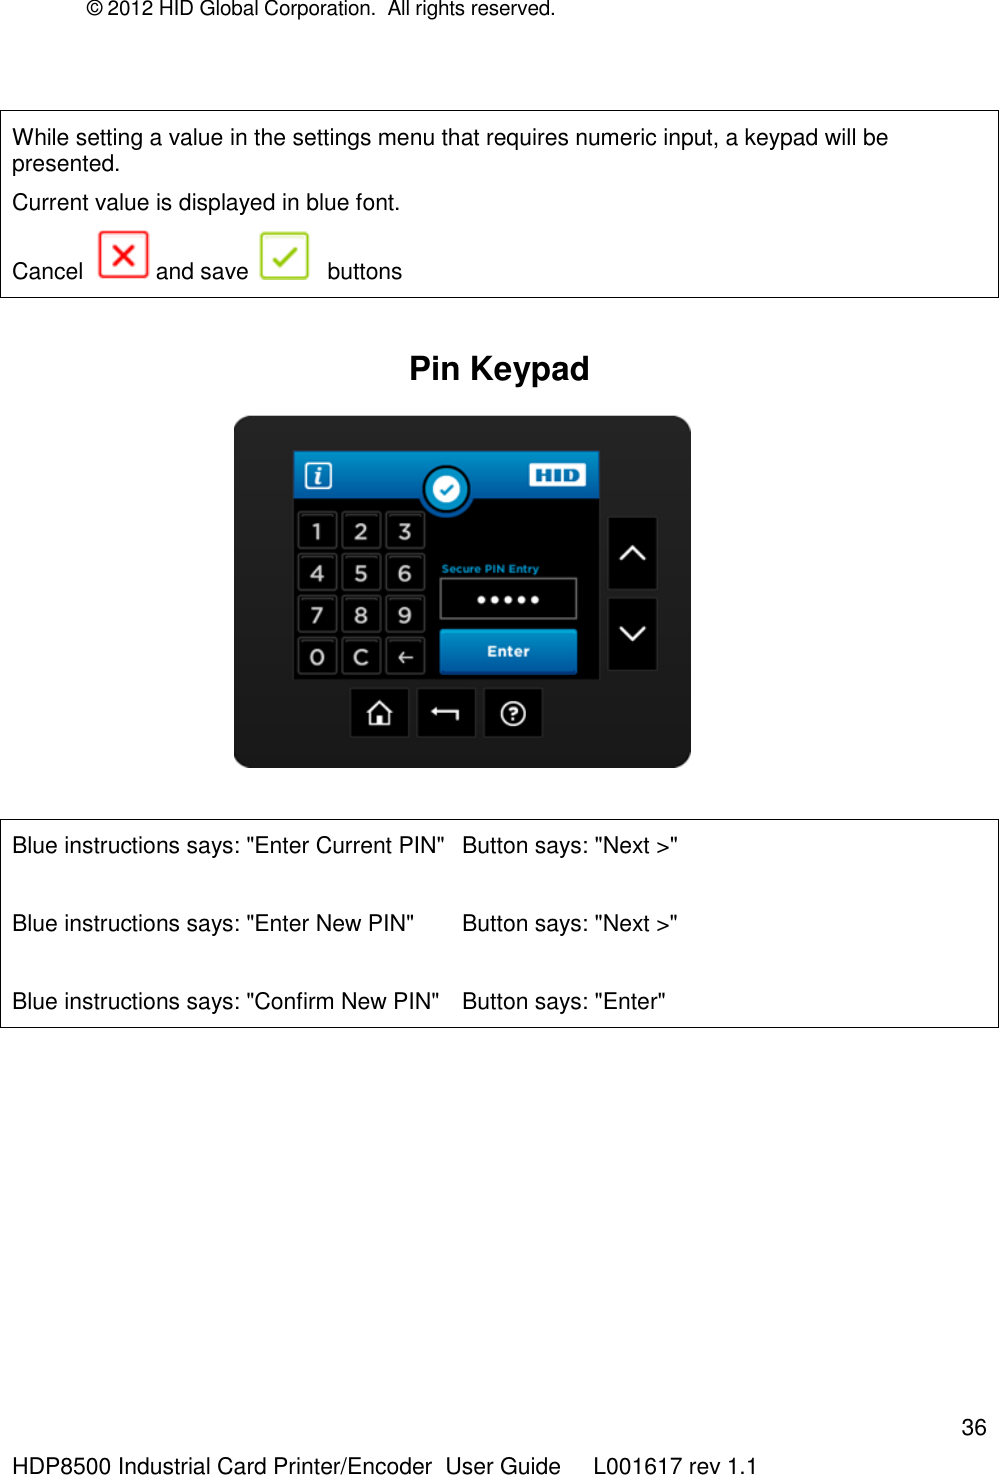 © 2012 HID Global Corporation.  All rights reserved.  36 HDP8500 Industrial Card Printer/Encoder  User Guide     L001617 rev 1.1  While setting a value in the settings menu that requires numeric input, a keypad will be presented.  Current value is displayed in blue font.  Cancel    and save    buttons  Pin Keypad                                       Blue instructions says: &quot;Enter Current PIN&quot;  Button says: &quot;Next &gt;&quot;  Blue instructions says: &quot;Enter New PIN&quot;  Button says: &quot;Next &gt;&quot;  Blue instructions says: &quot;Confirm New PIN&quot;  Button says: &quot;Enter&quot;  